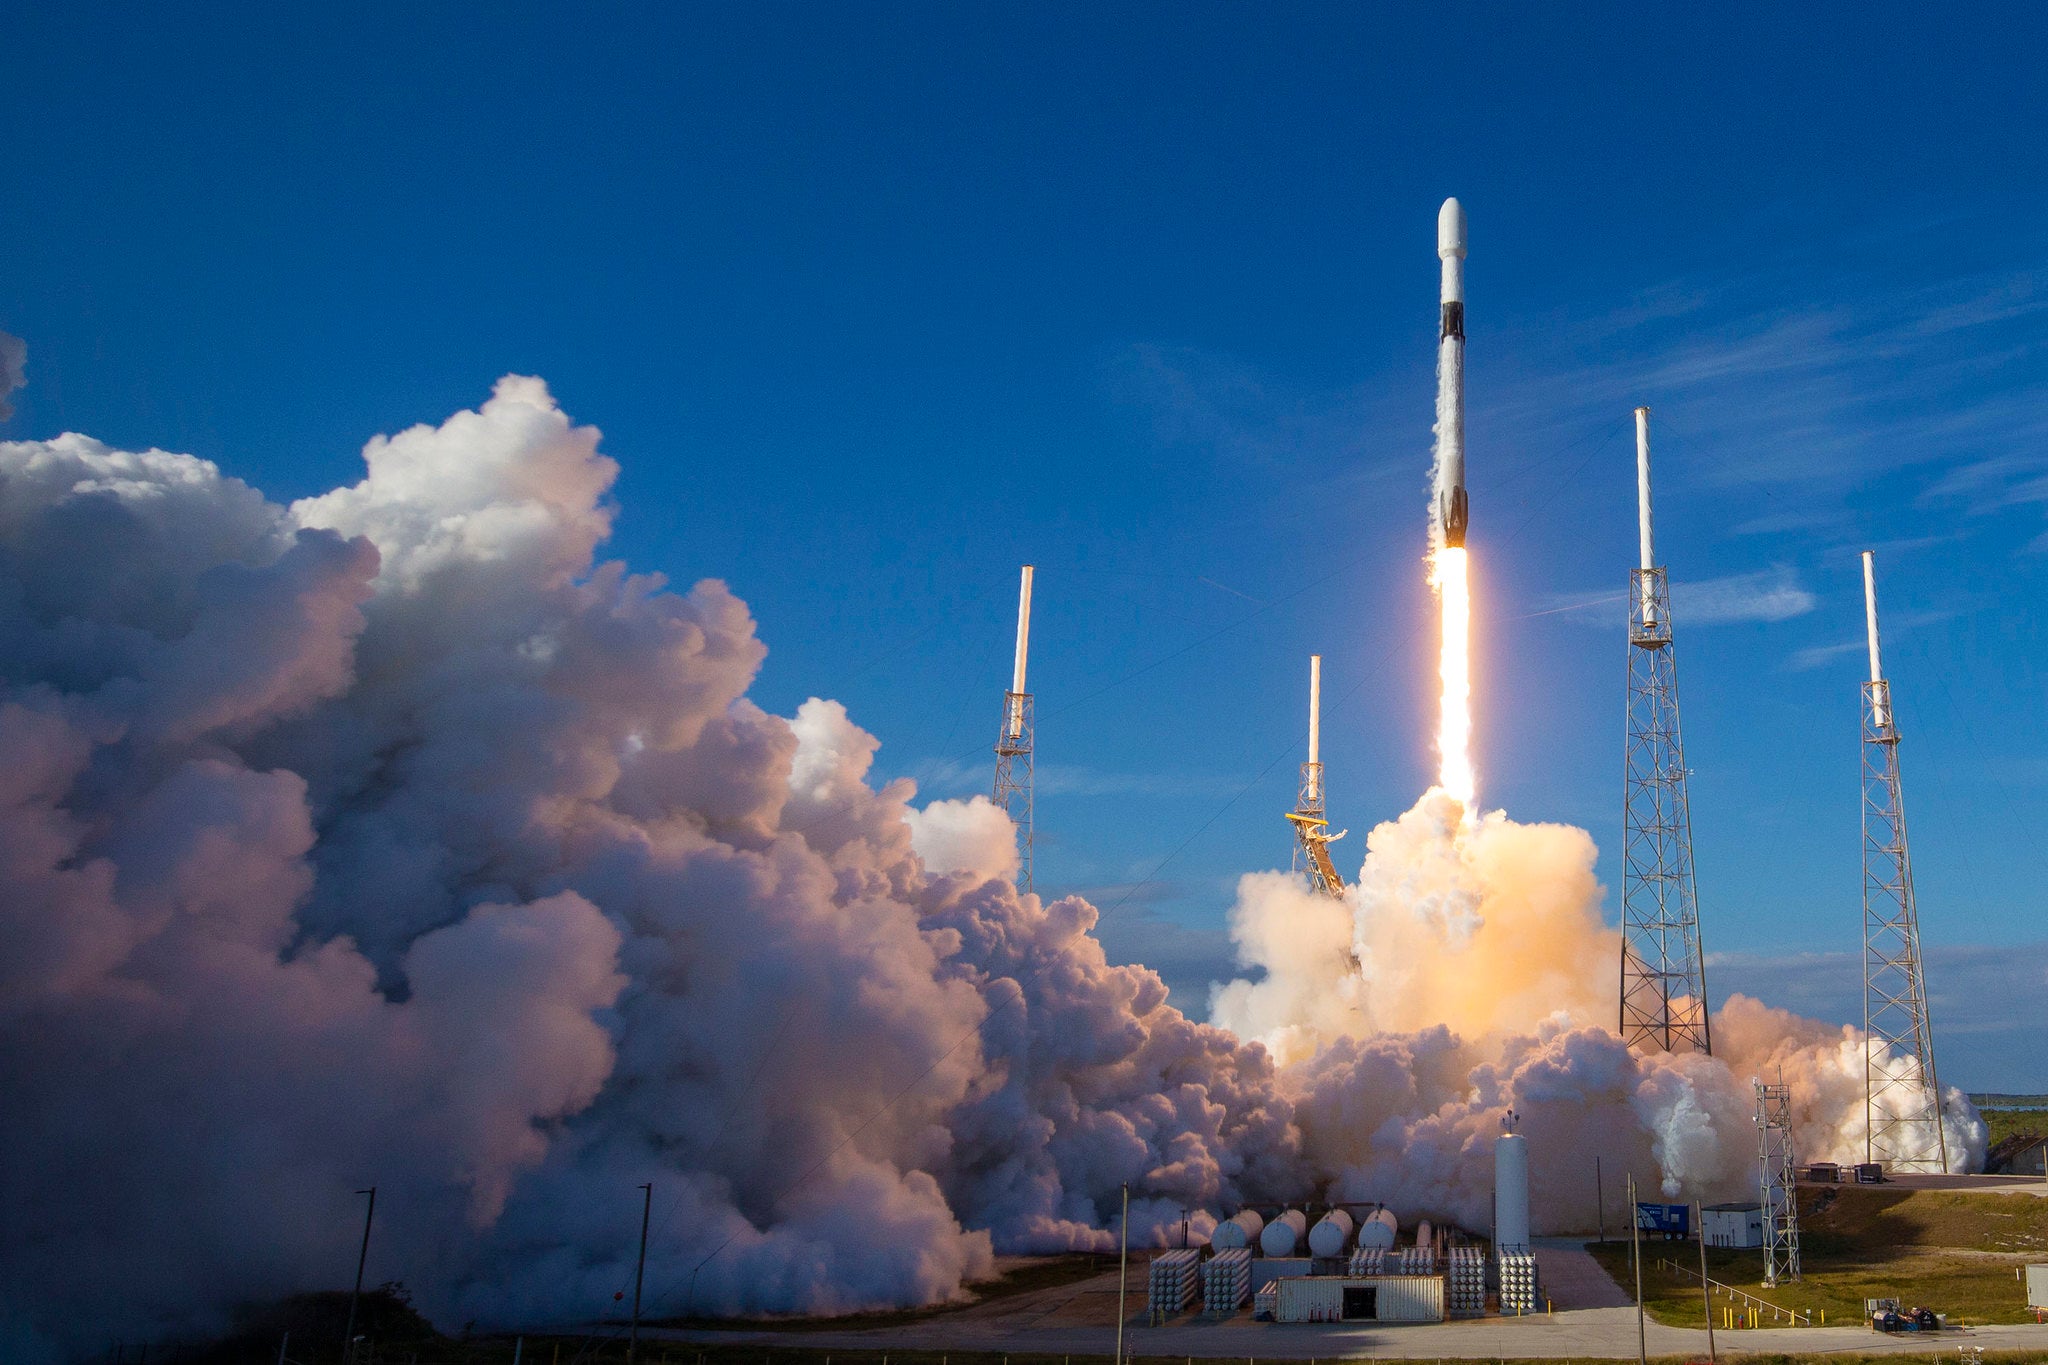 SpaceX valuation increases to $74 billion with the recent $850 million capital raise